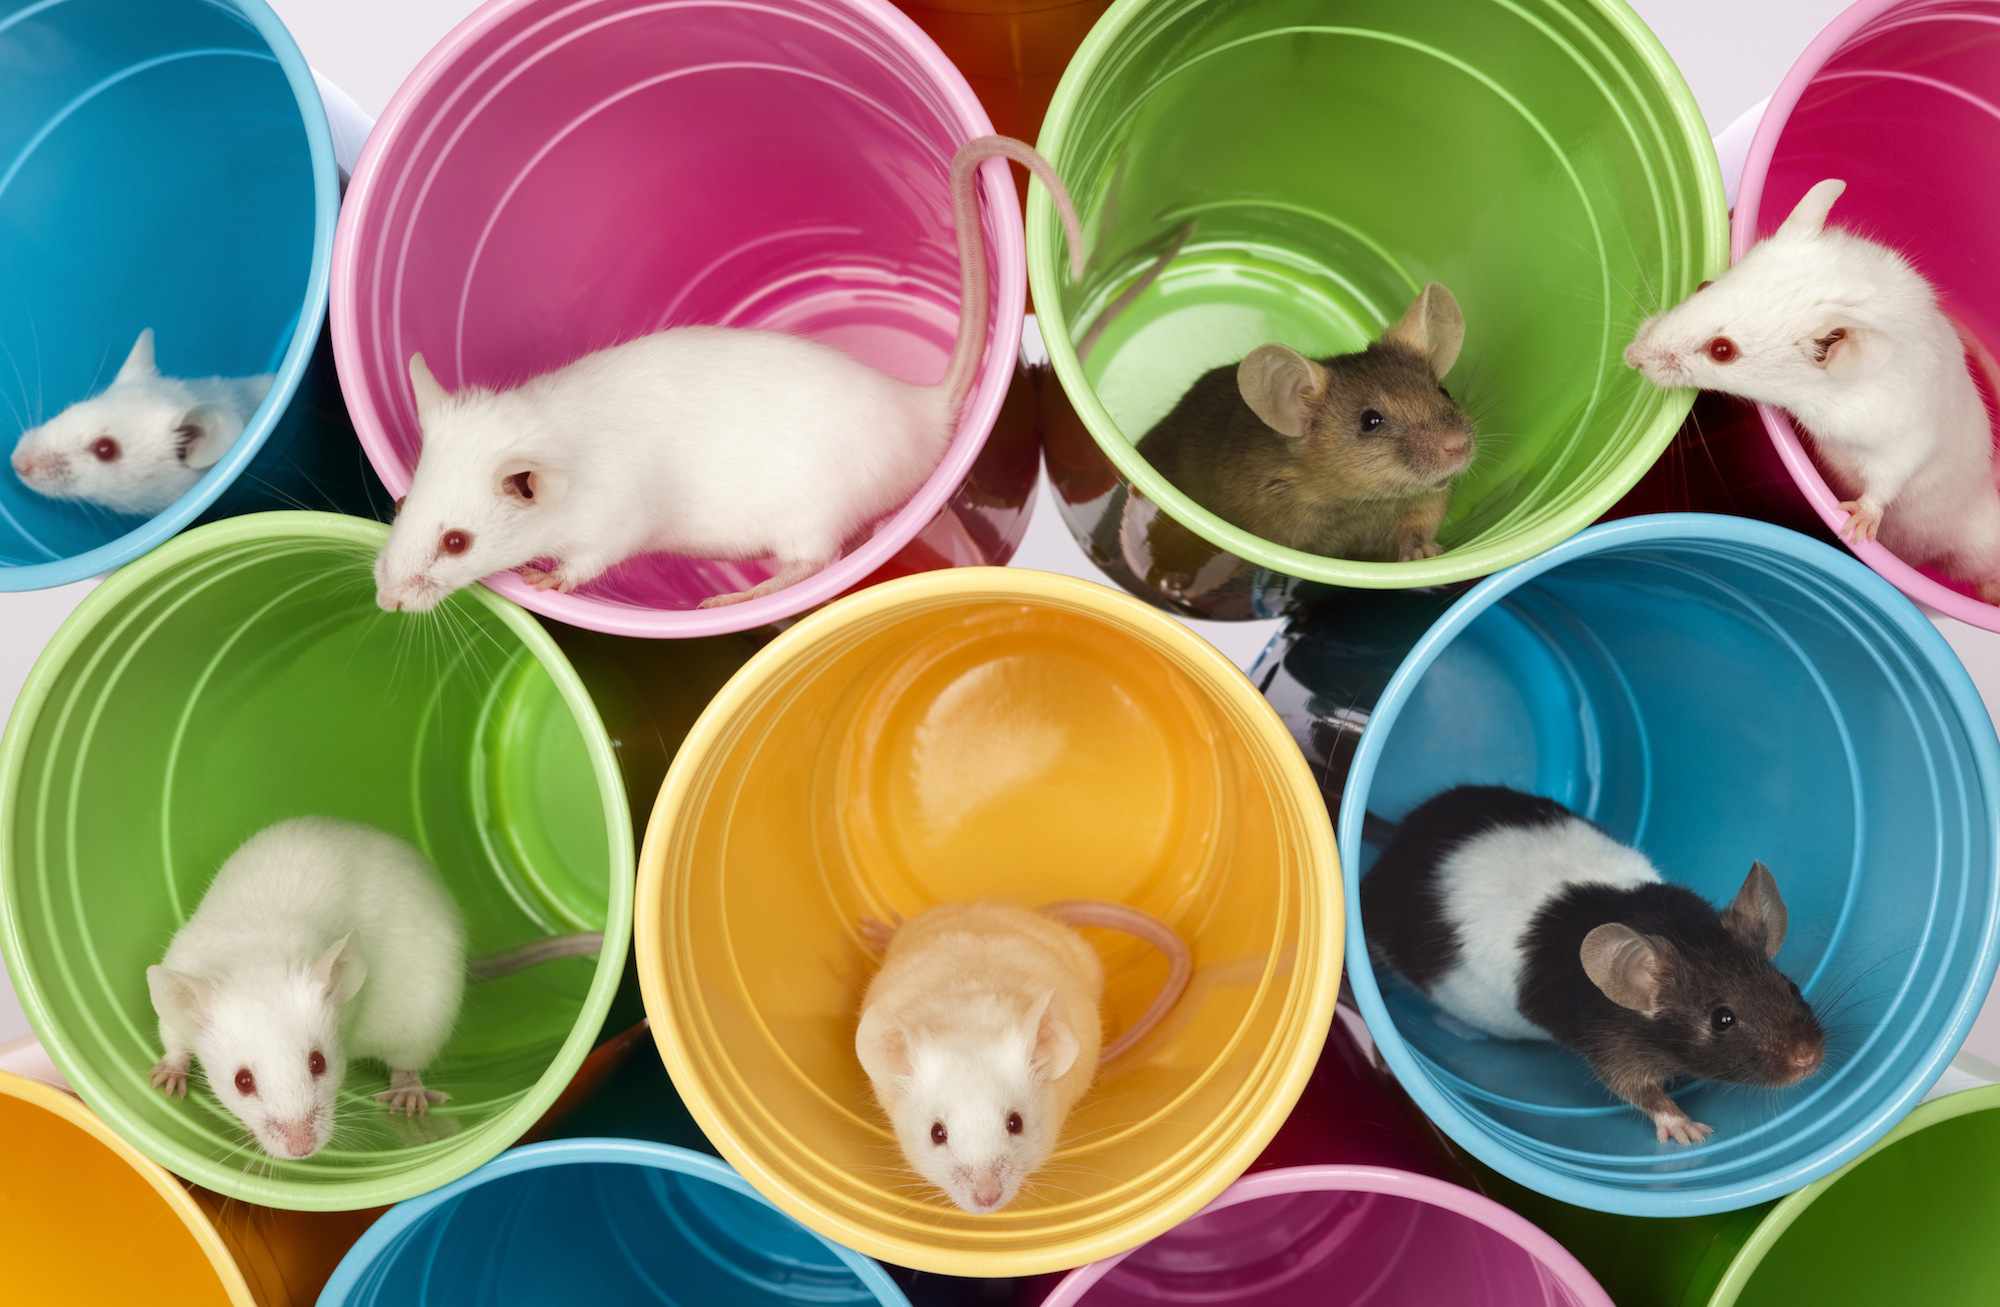 Mice sitting in colorful cups